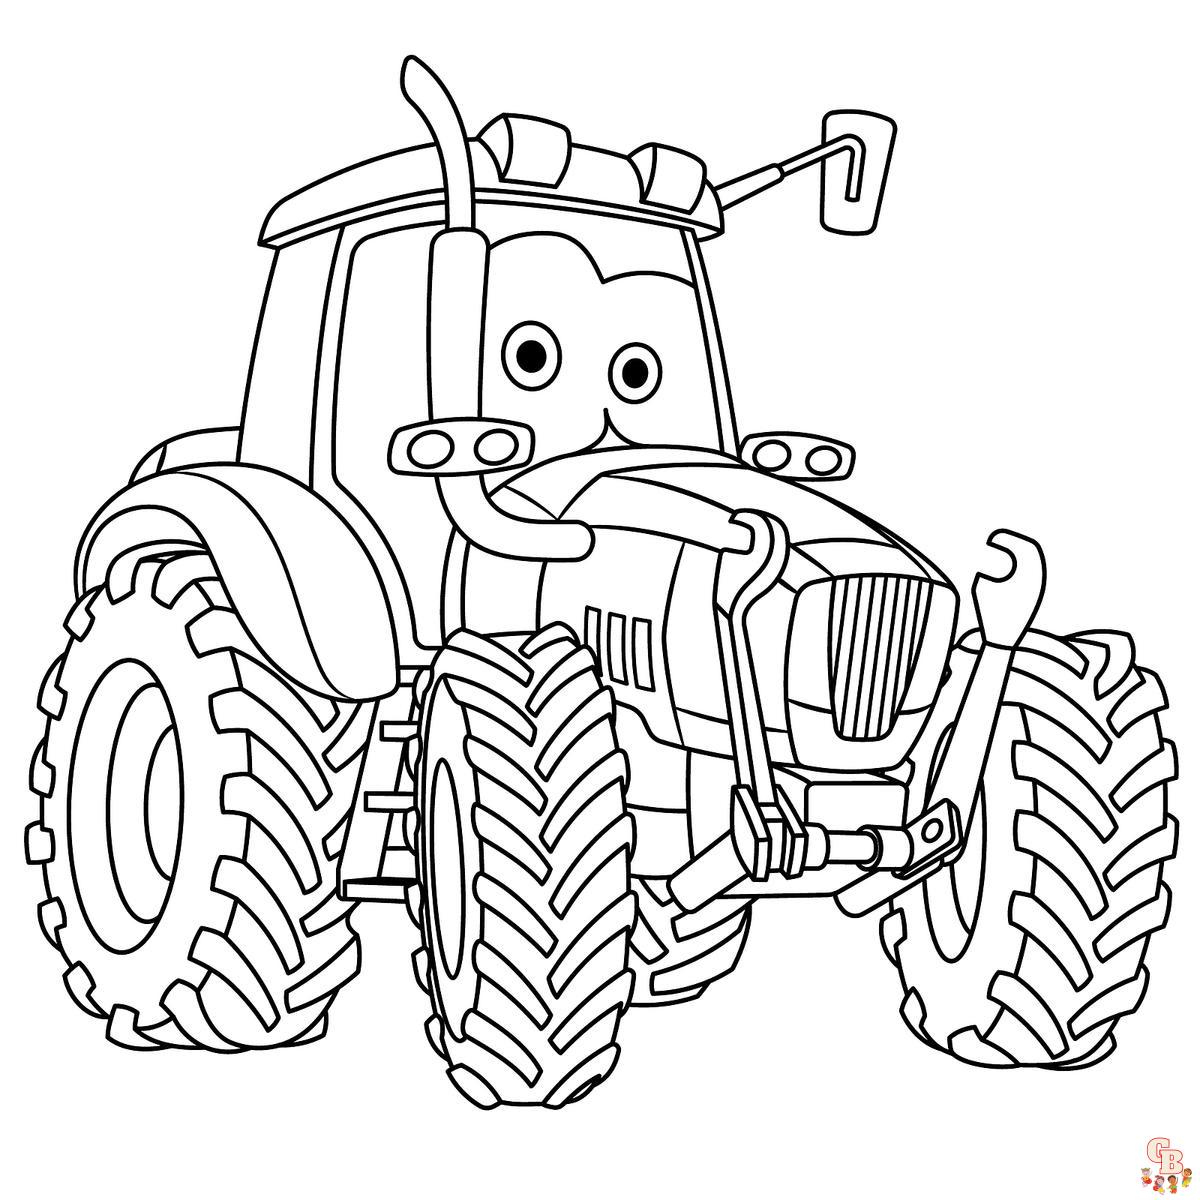 Cute Tow Mater coloring pages free 2